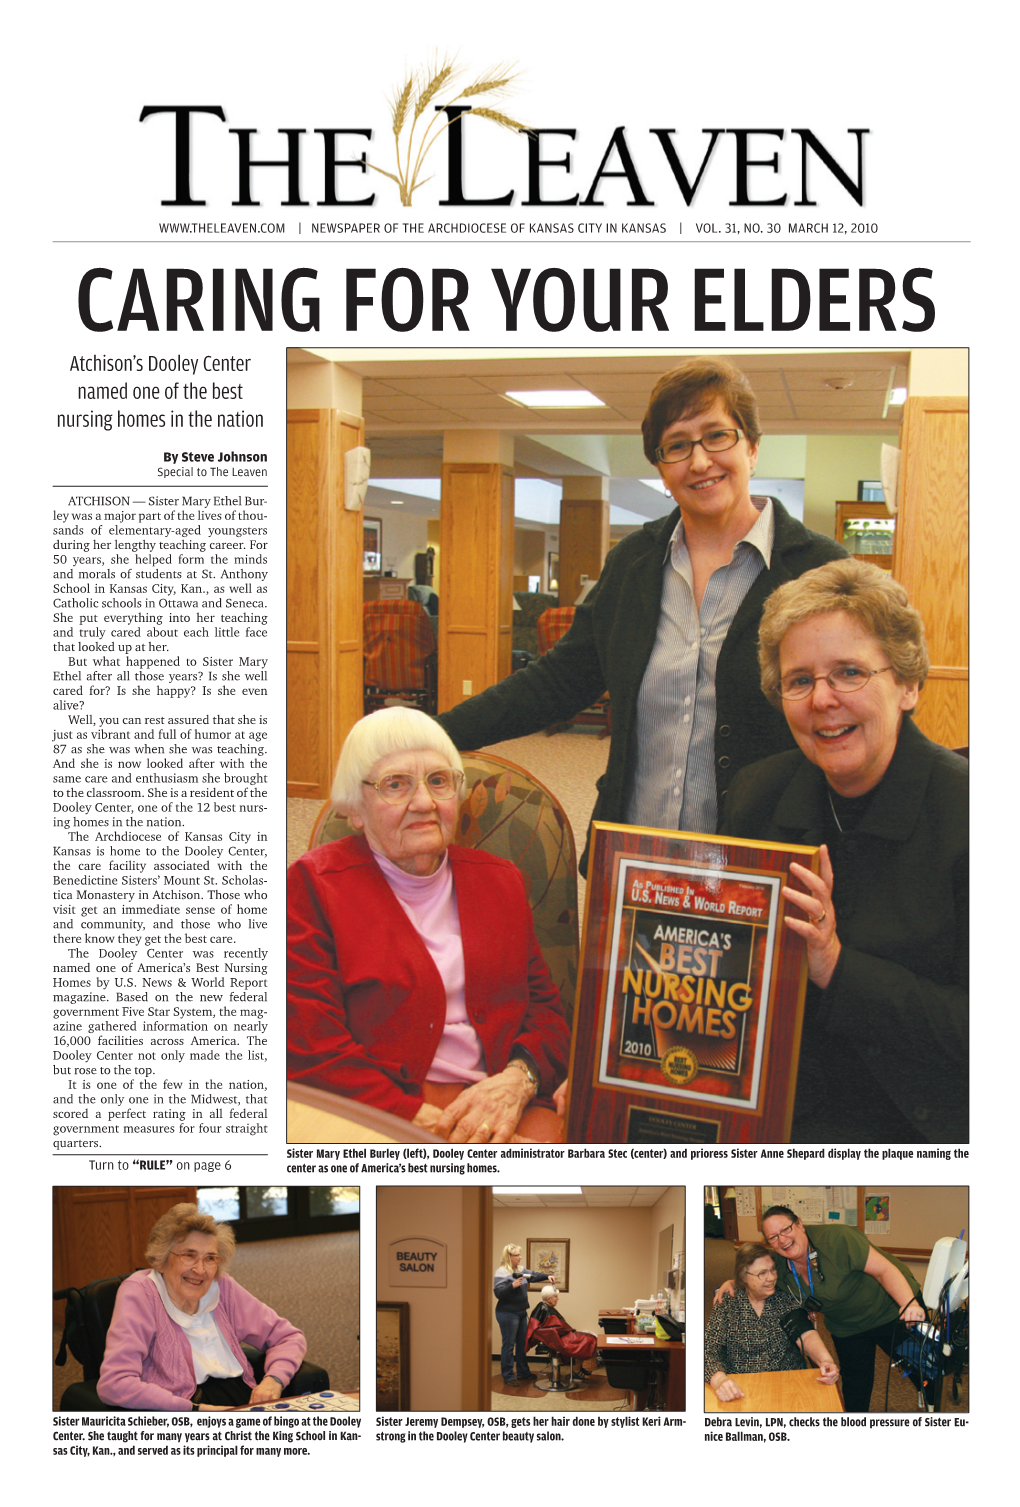 Atchison's Dooley Center Named One of the Best Nursing Homes in The